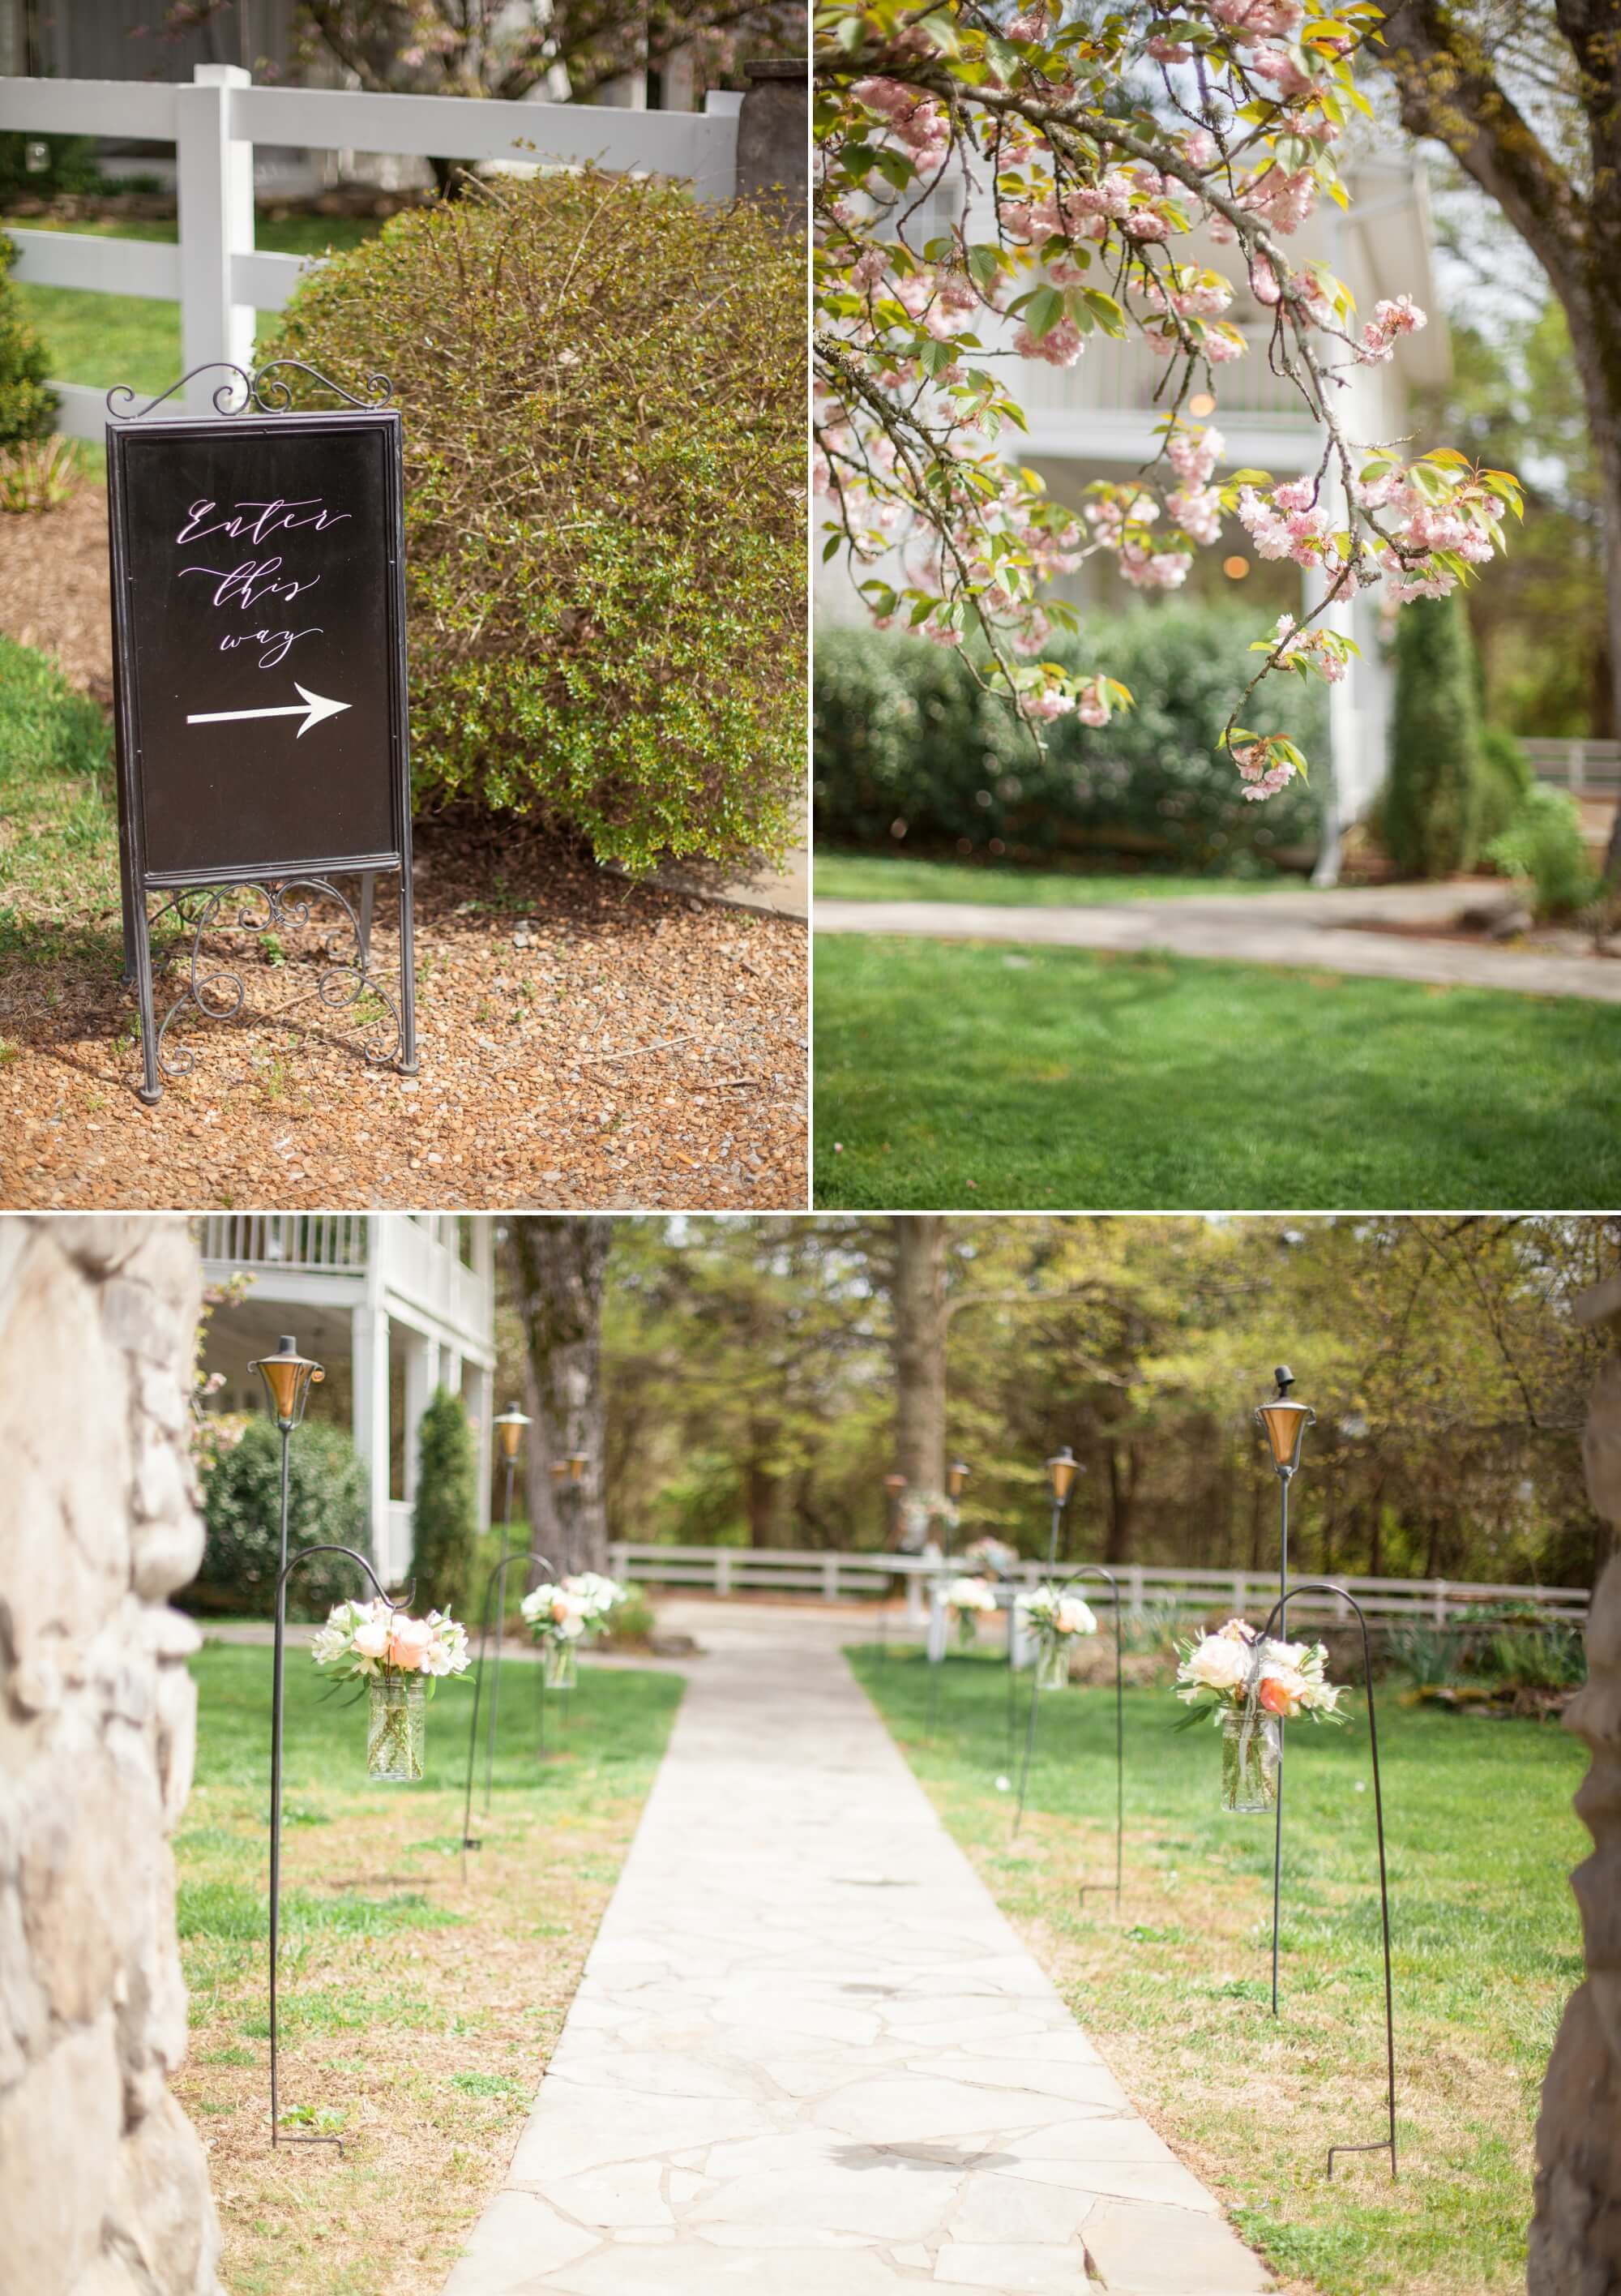 Entrance to Spring wedding at Cedarwood Weddings in Nashville, TN. Photo by Krista Lee Photography, from Sam and Izzy's wedding day.